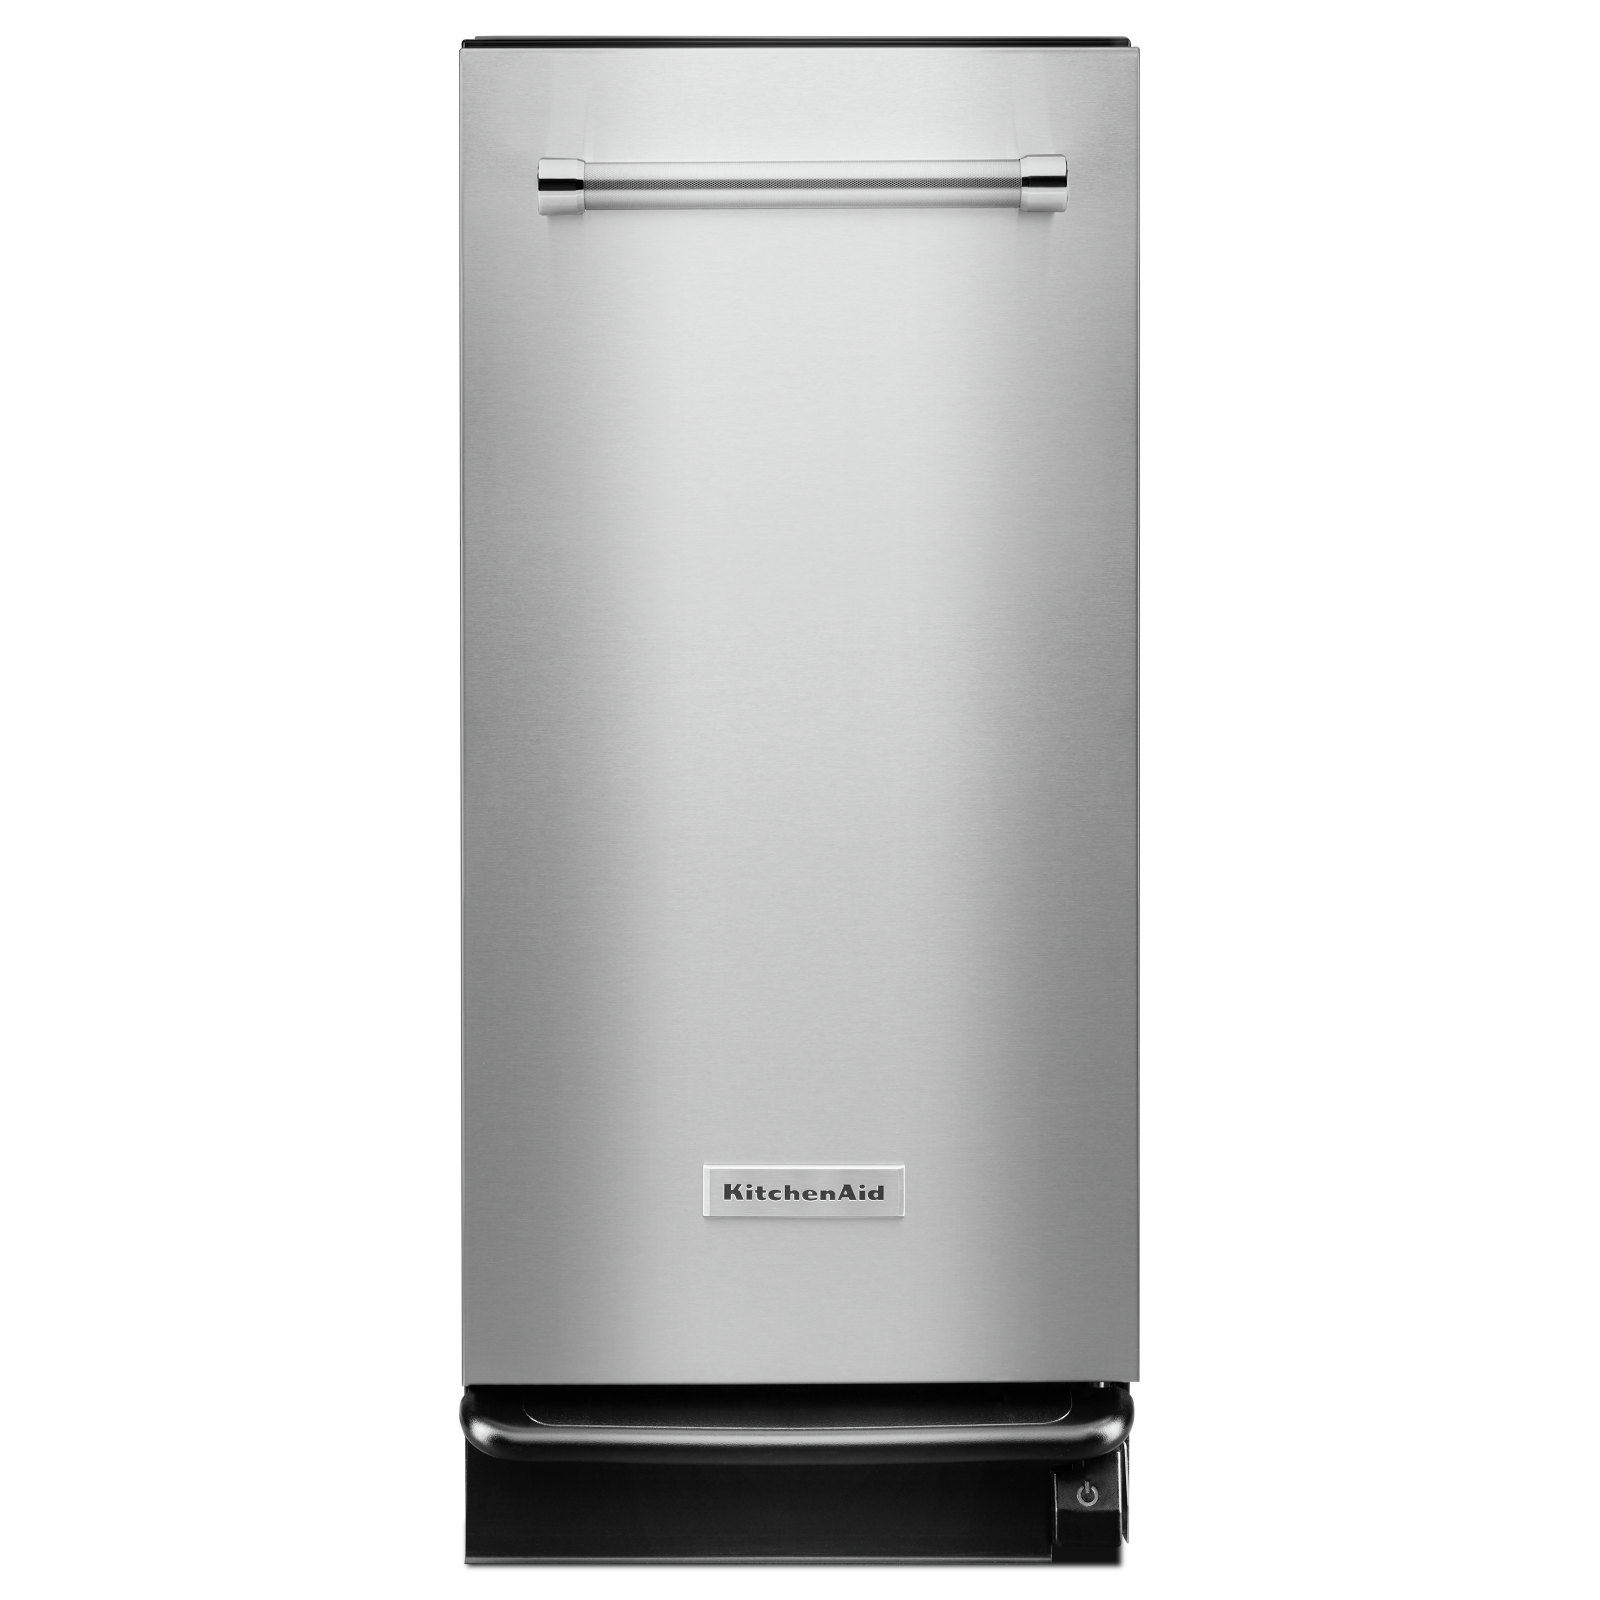 KitchenAid - 15 Inch 1.4 cu. ft Built In / Integrated Trash Compactor in Stainless - KTTS505ESS